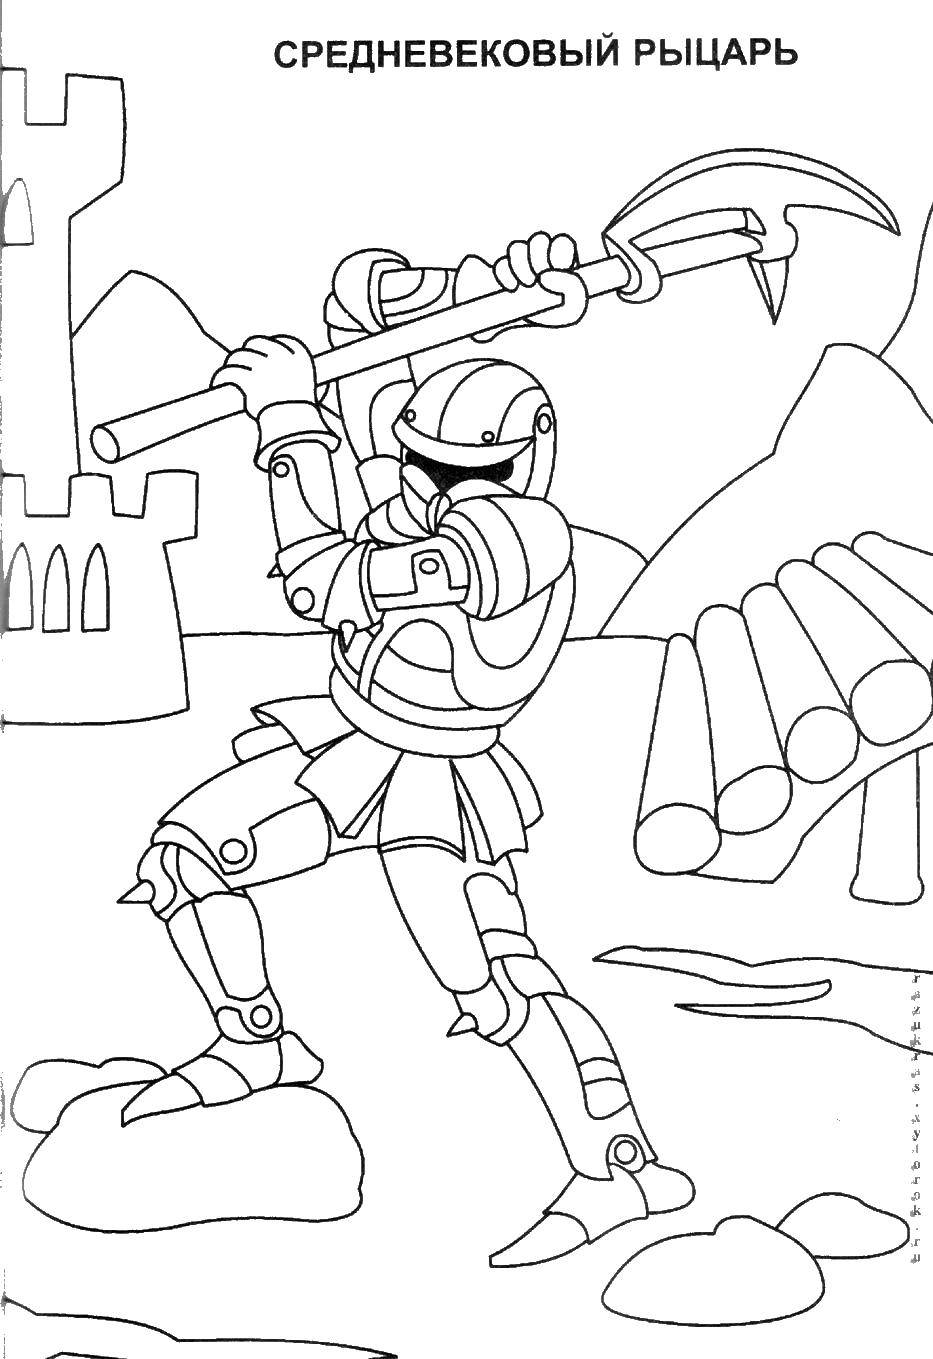 Coloring Medieval knight. Category the crusaders. Tags:  Warrior , knight.